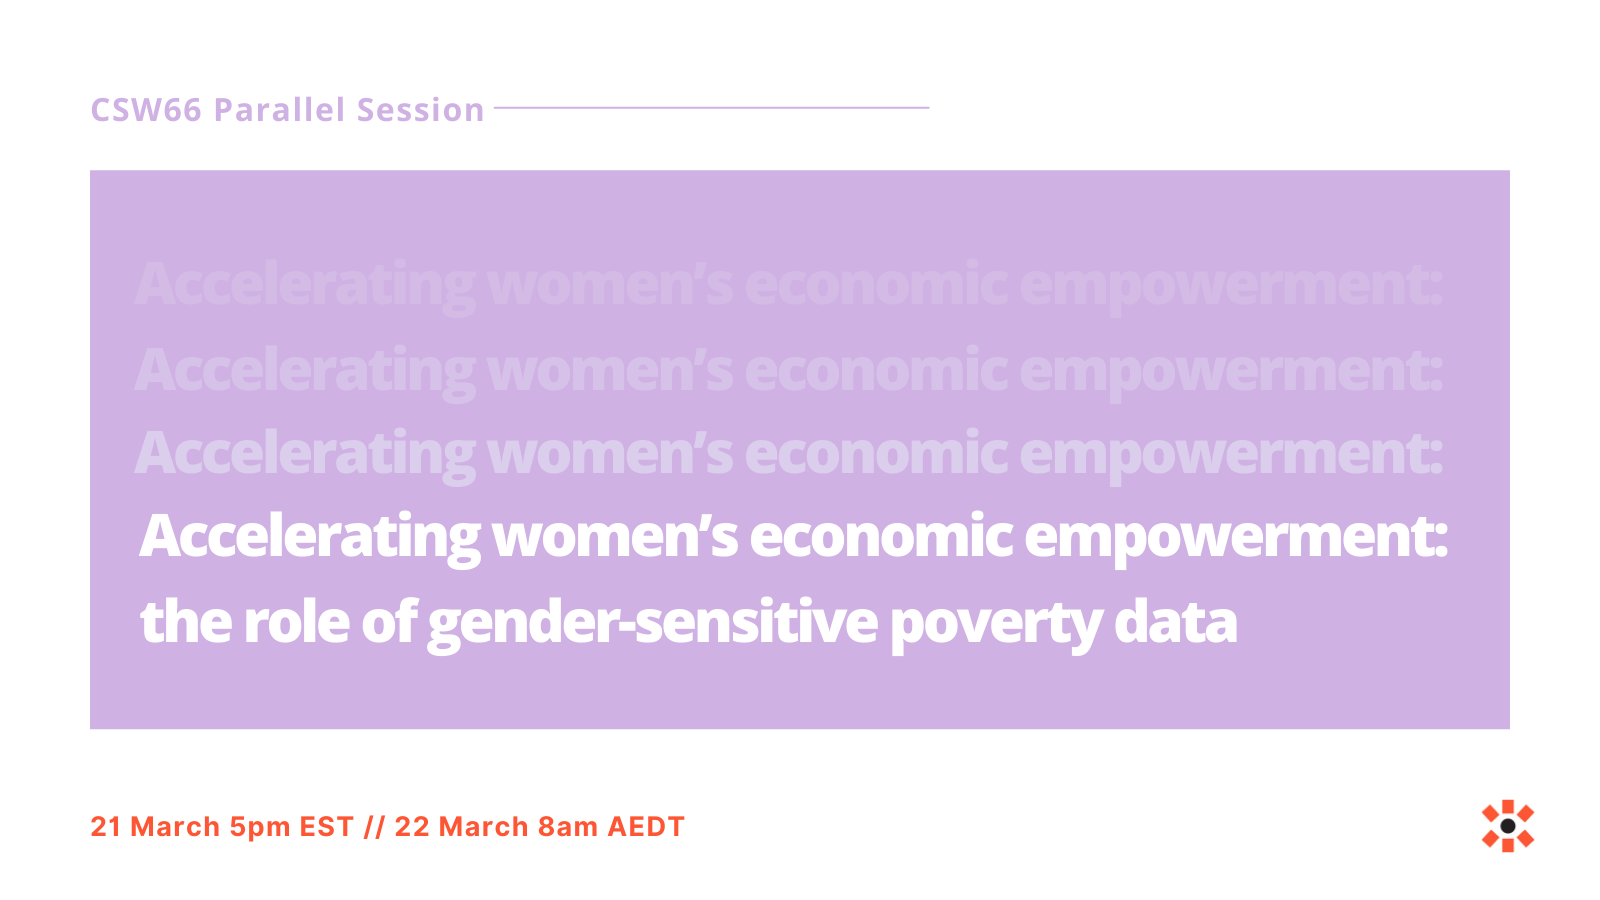 CSW Parallel Session. Accelerating women’s economic empowerment: the role of gender-sensitive poverty data. 21 March 5pm EST//22 March 8am AEDT.